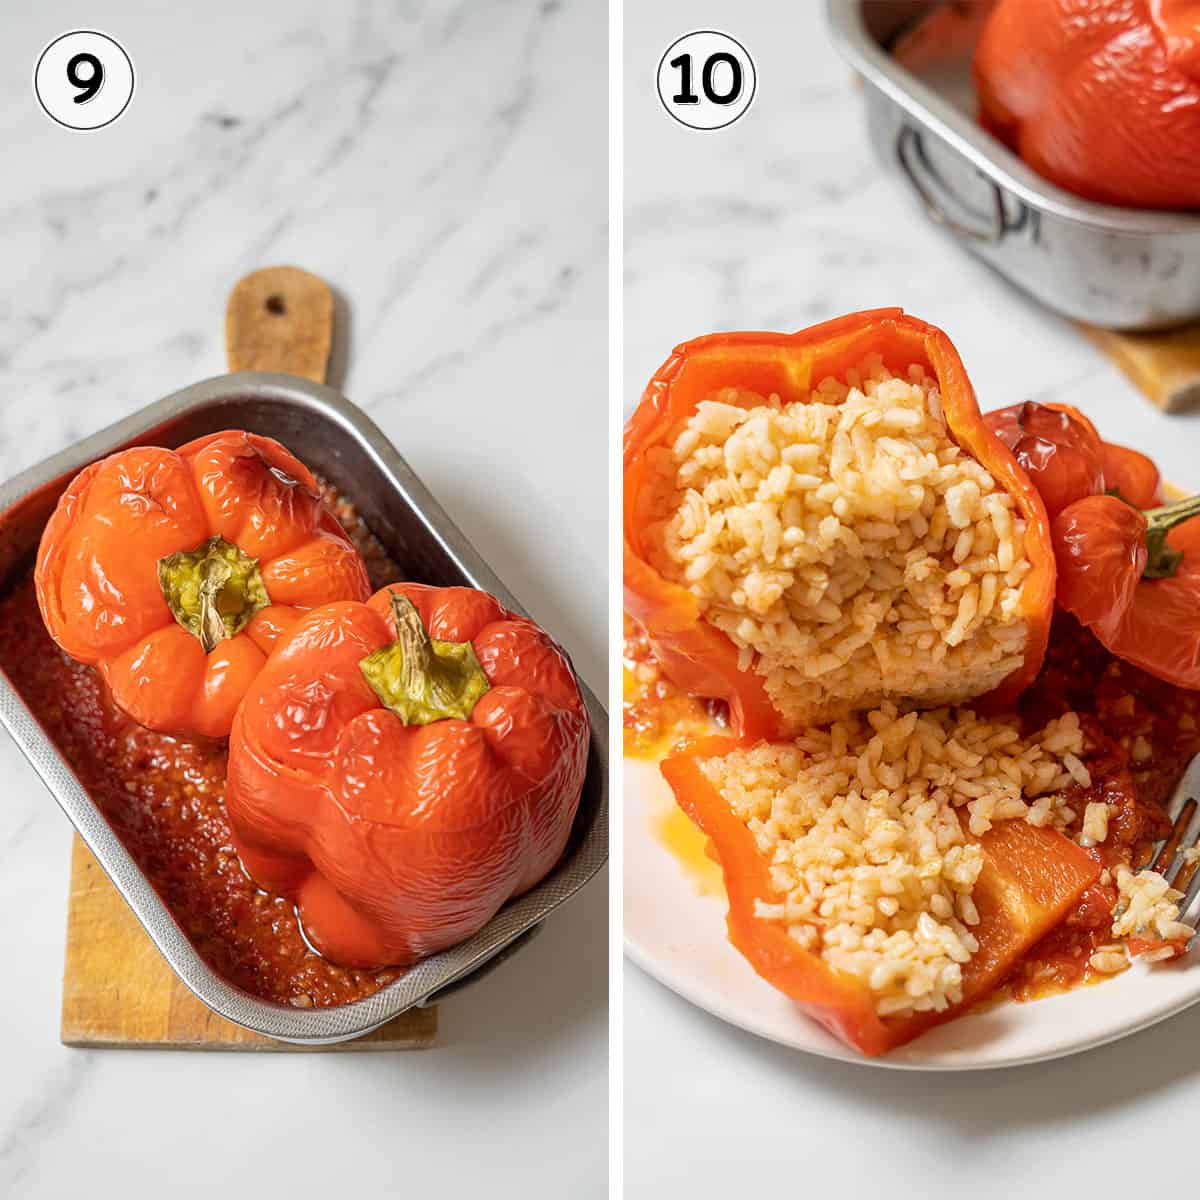 cooked stuffed peppers and served on a plate.